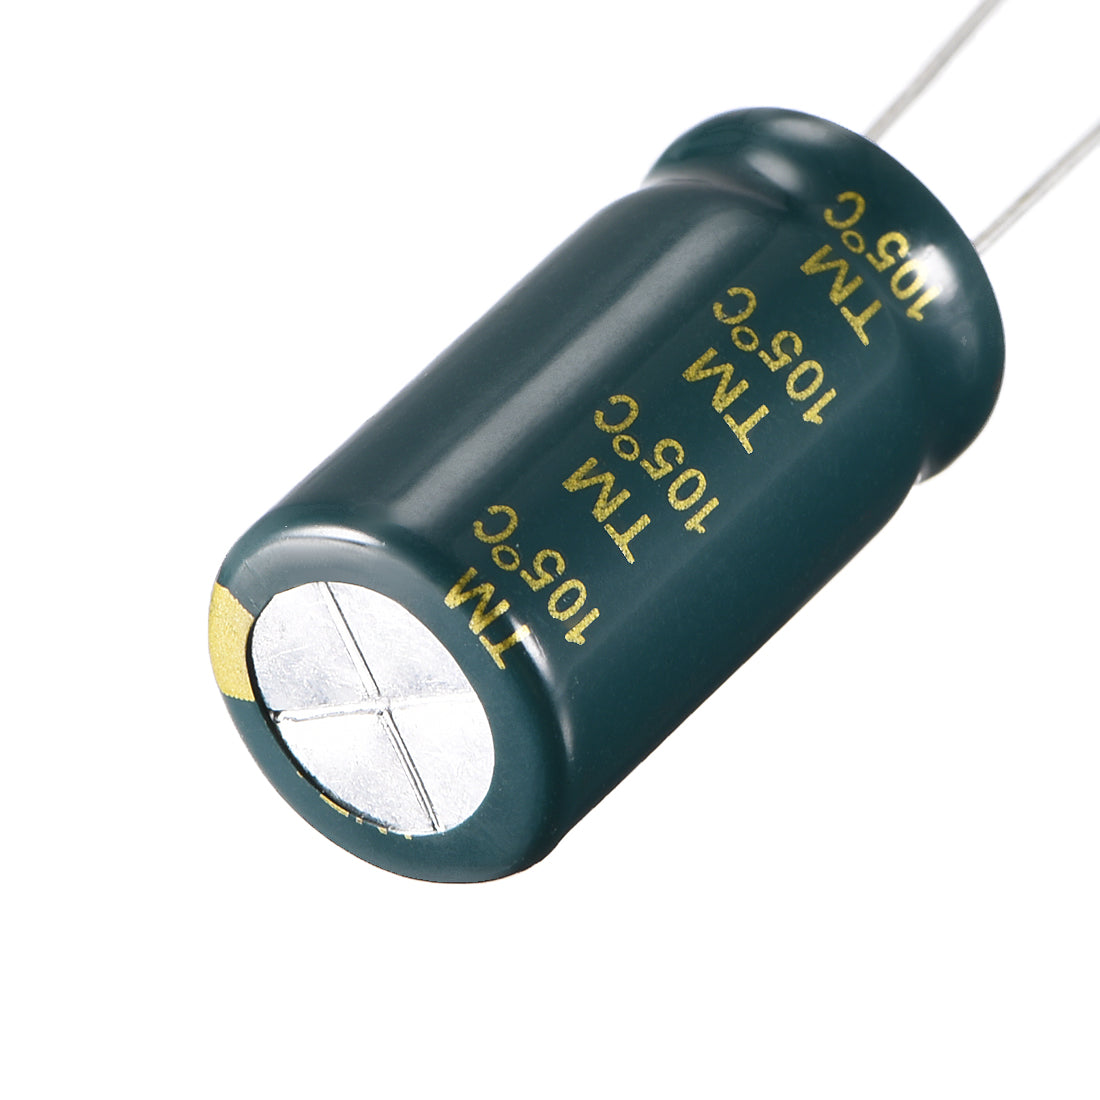 uxcell Uxcell Aluminum Radial Electrolytic Capacitor Low ESR Green with 1000UF 50V 105 Celsius Life 3000H 13 x 25 mm High Ripple Current,Low Impedance 10pcs